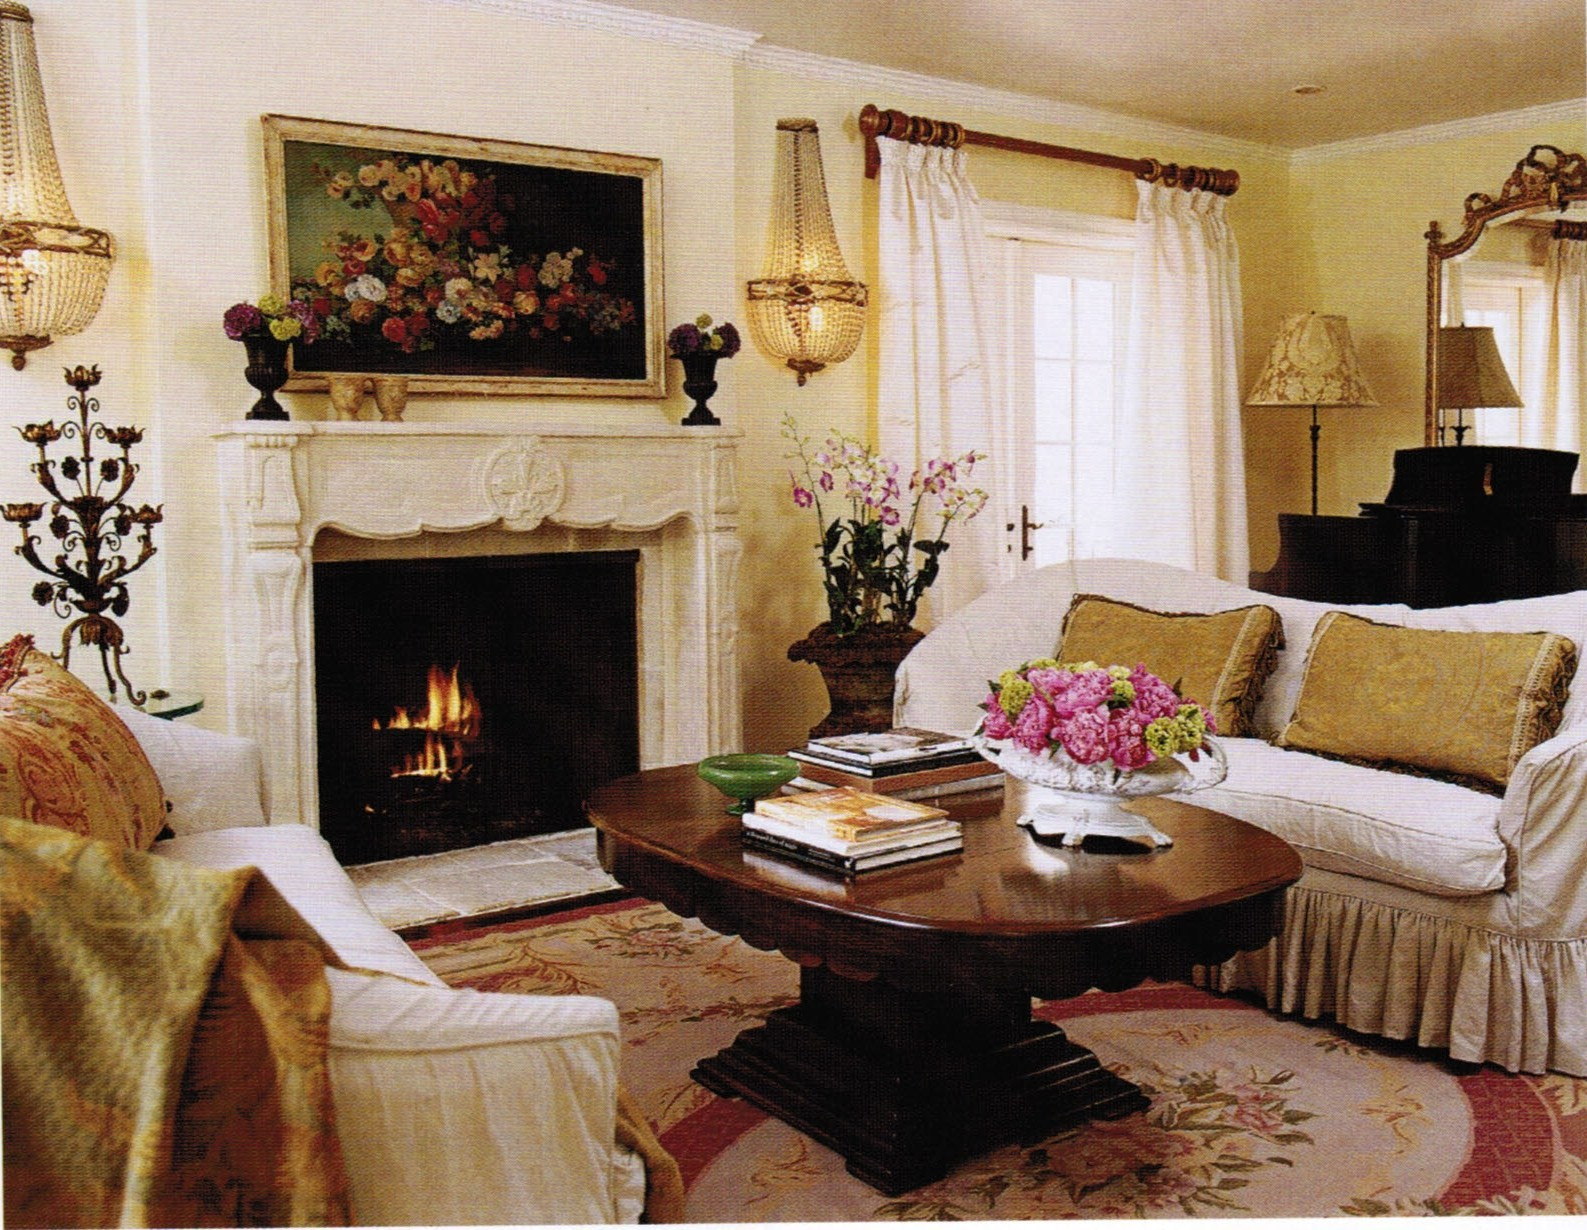 French Country Living Room Ideas
 Maison Decor French Country Enchanting Yellow & White